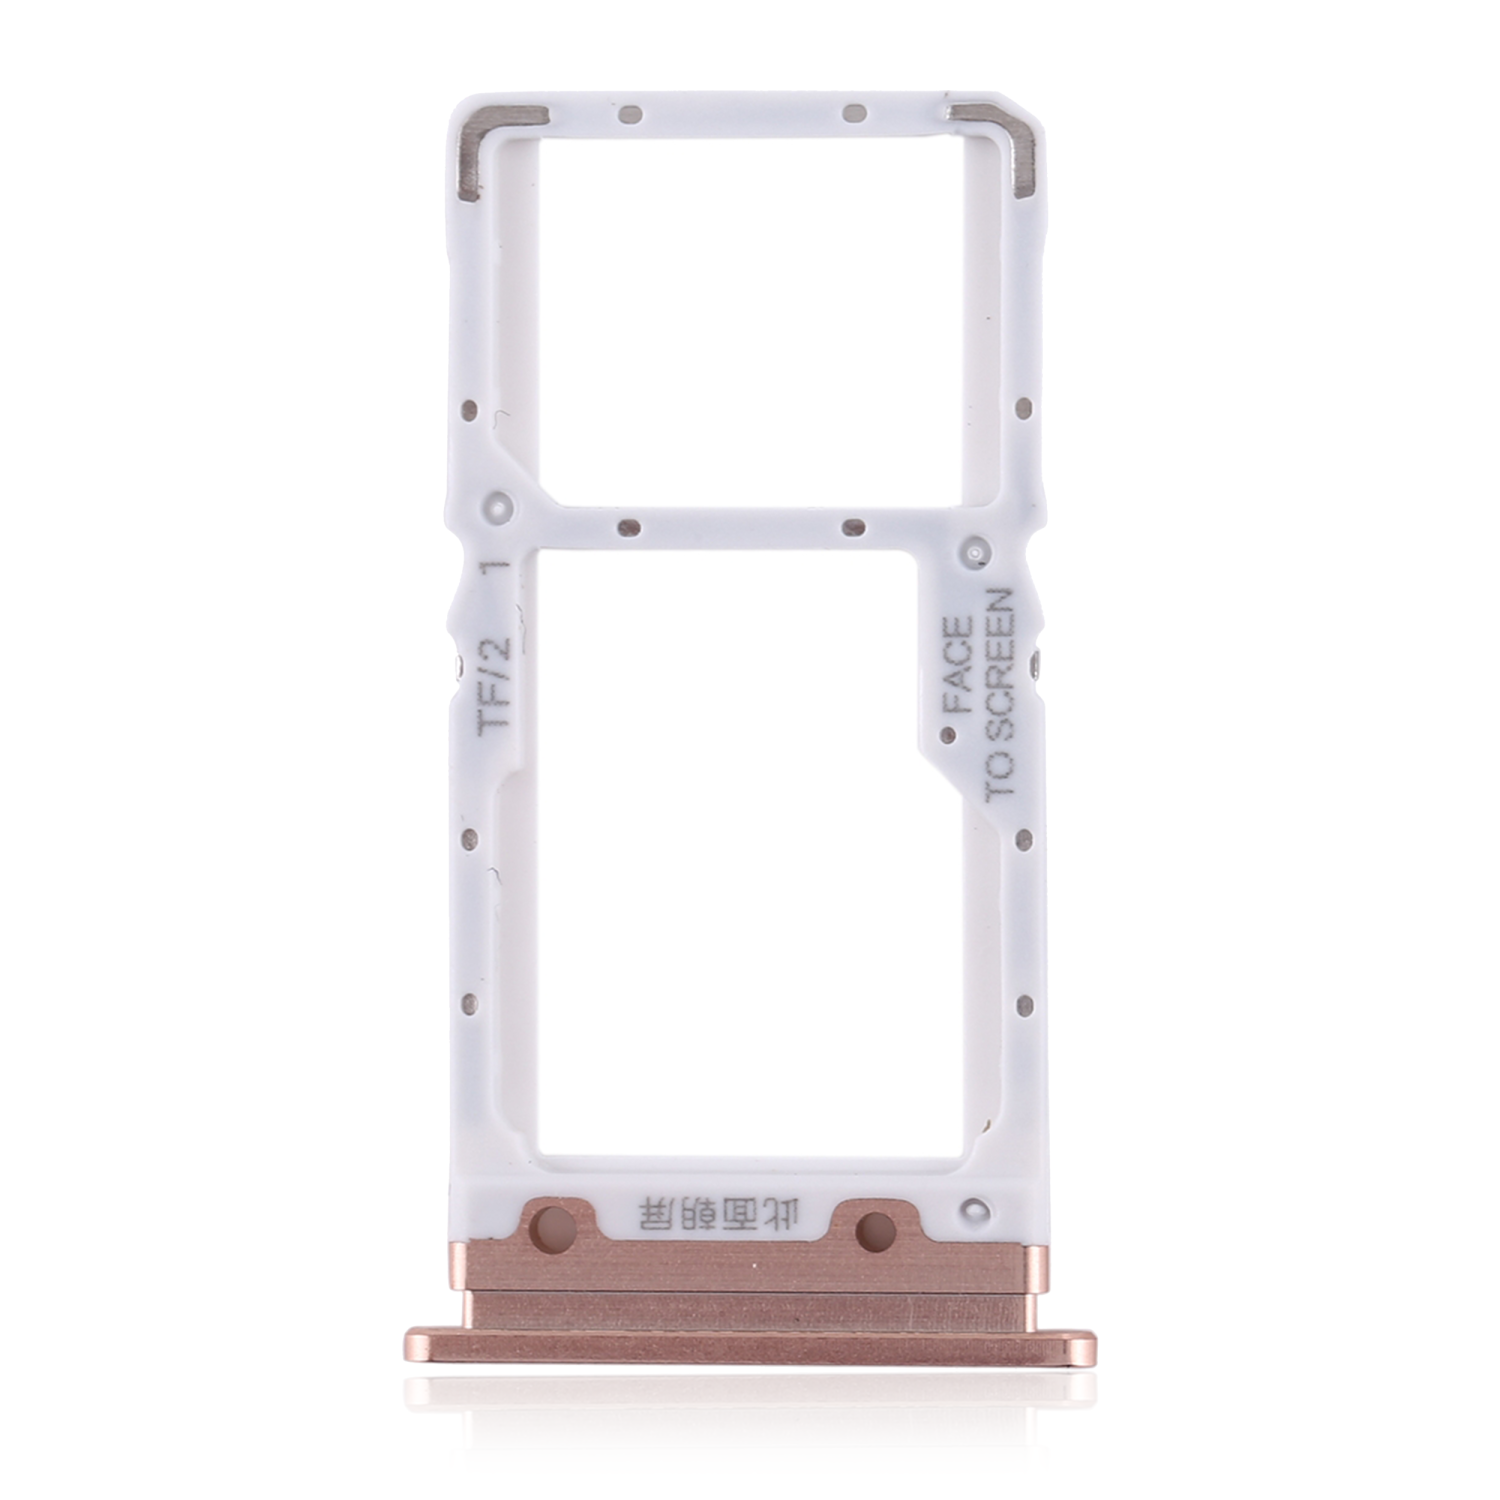 Replacement Dual Sim Card Tray Compatible For Xiaomi Mi 9 Lite / CC9 (Gold)